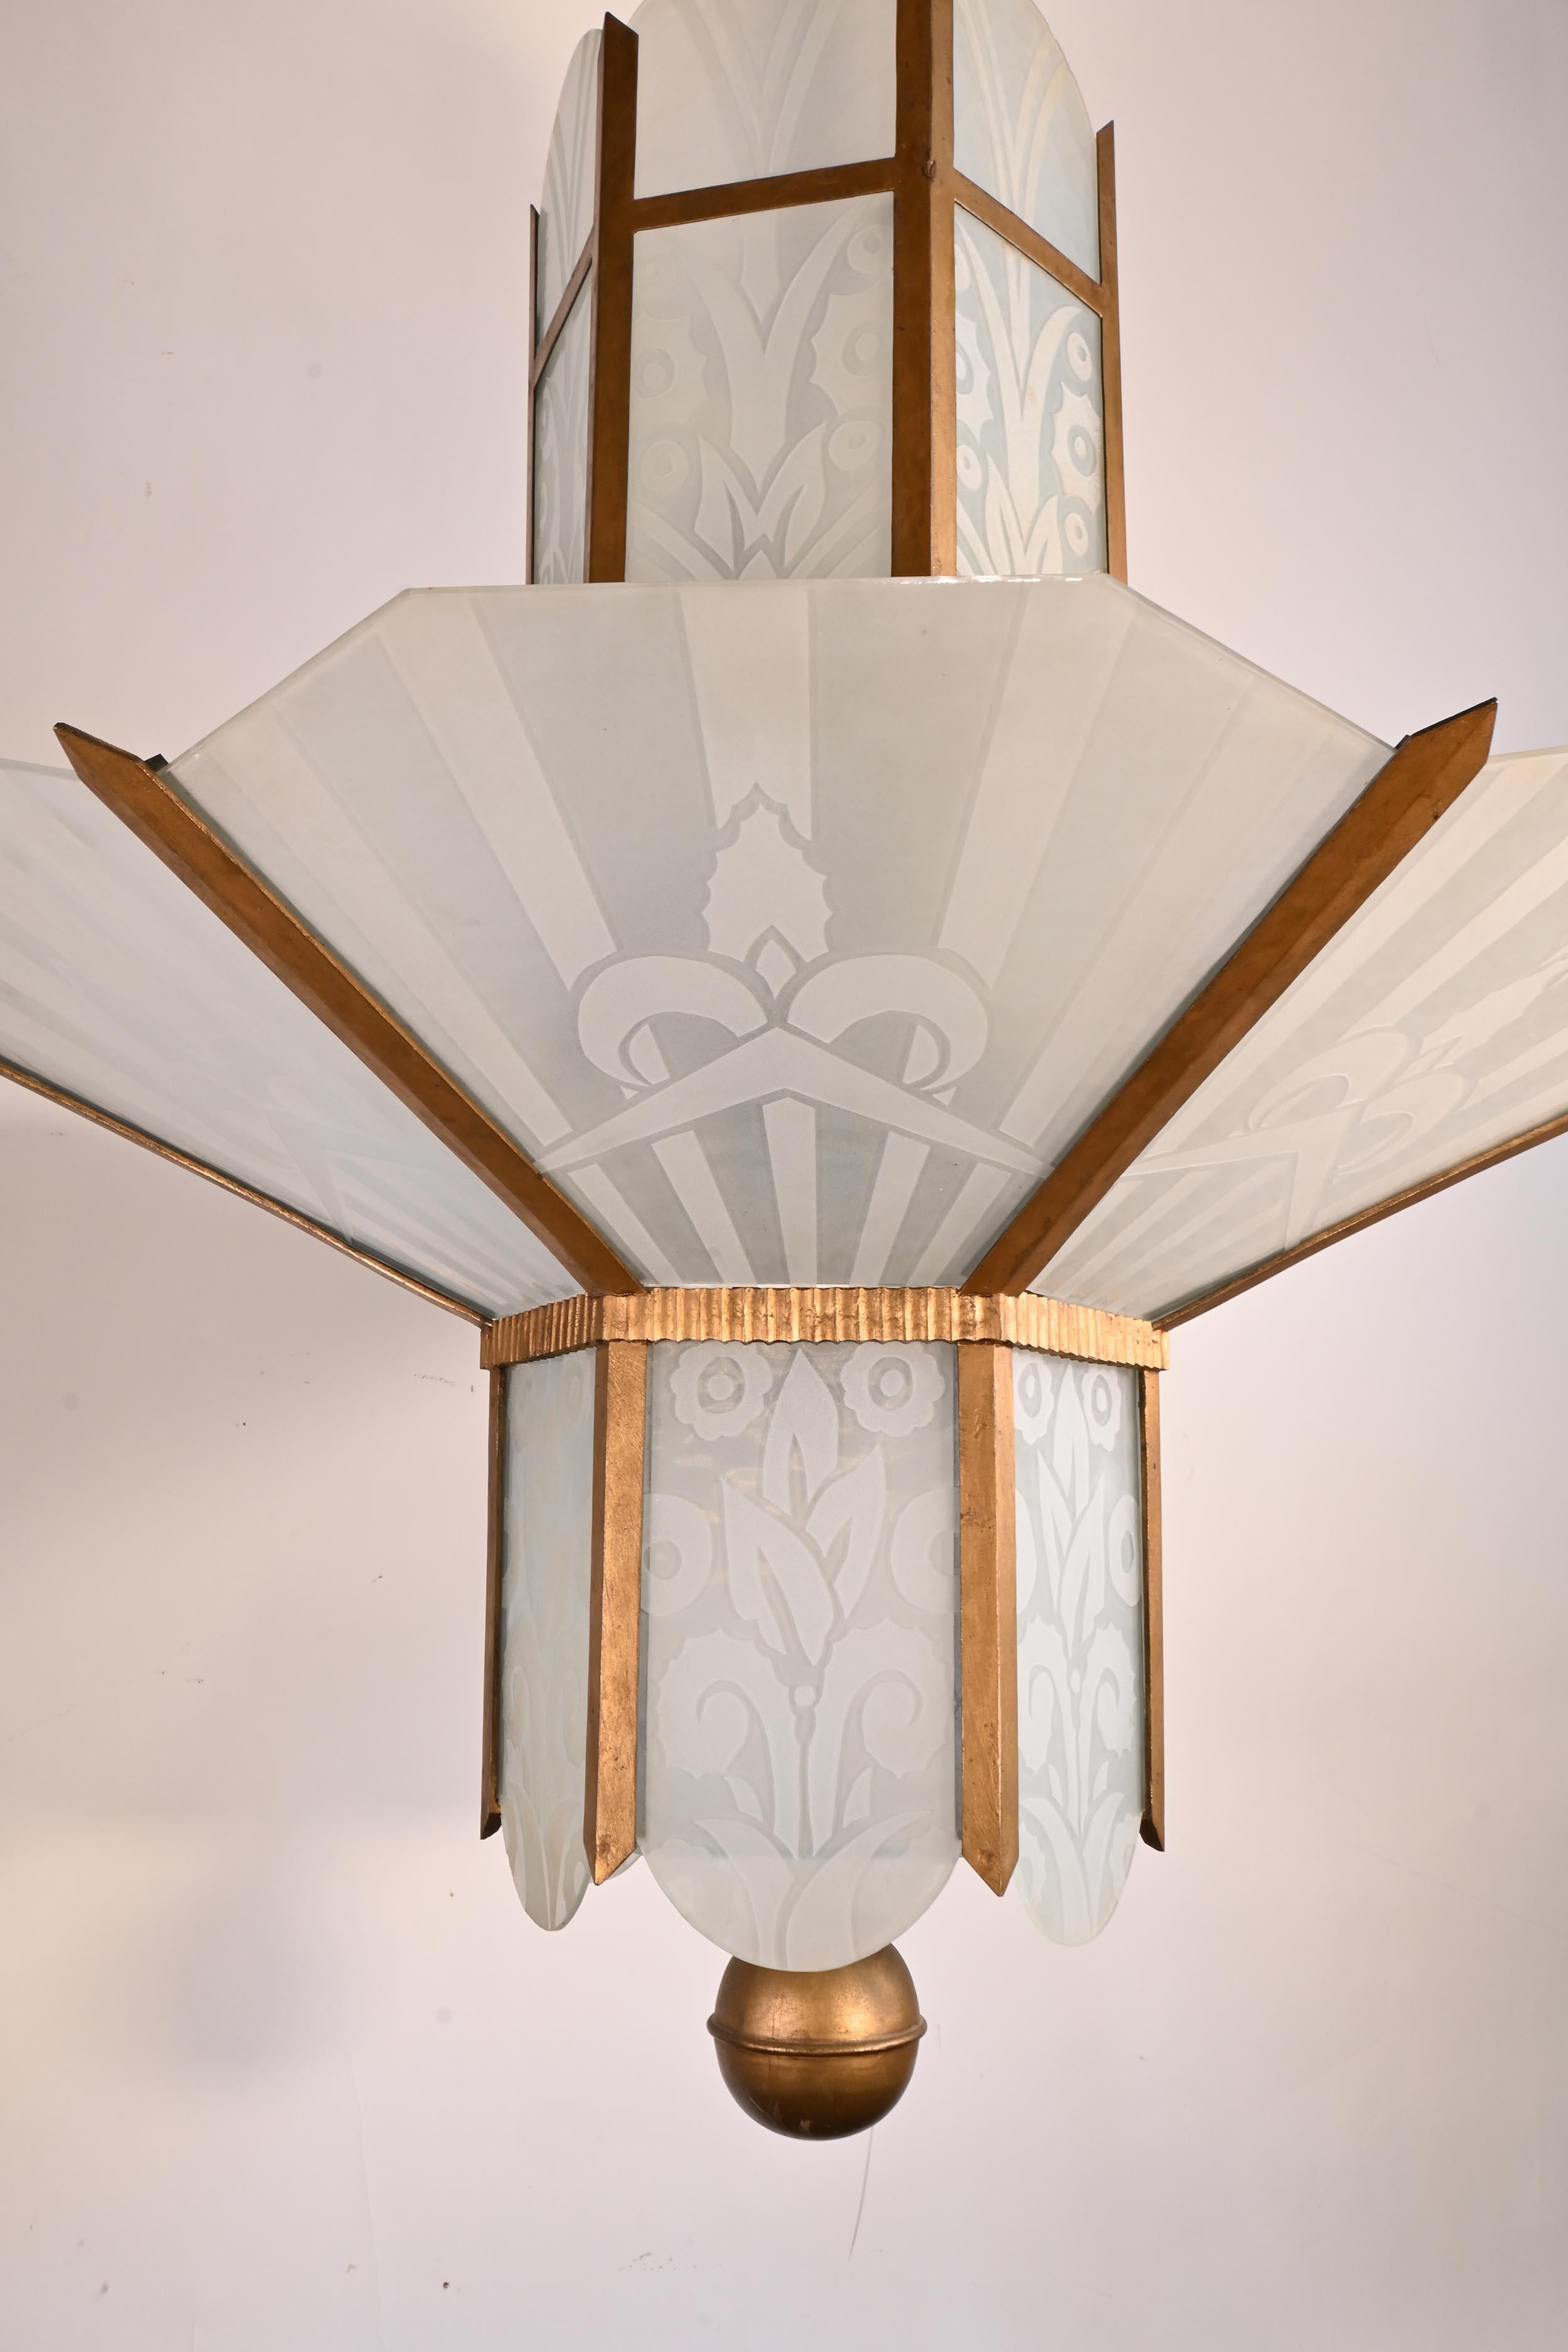 American Lobby or Ballroom High Art Deco / Art Nouveau Large Scale Chandeliers For Sale